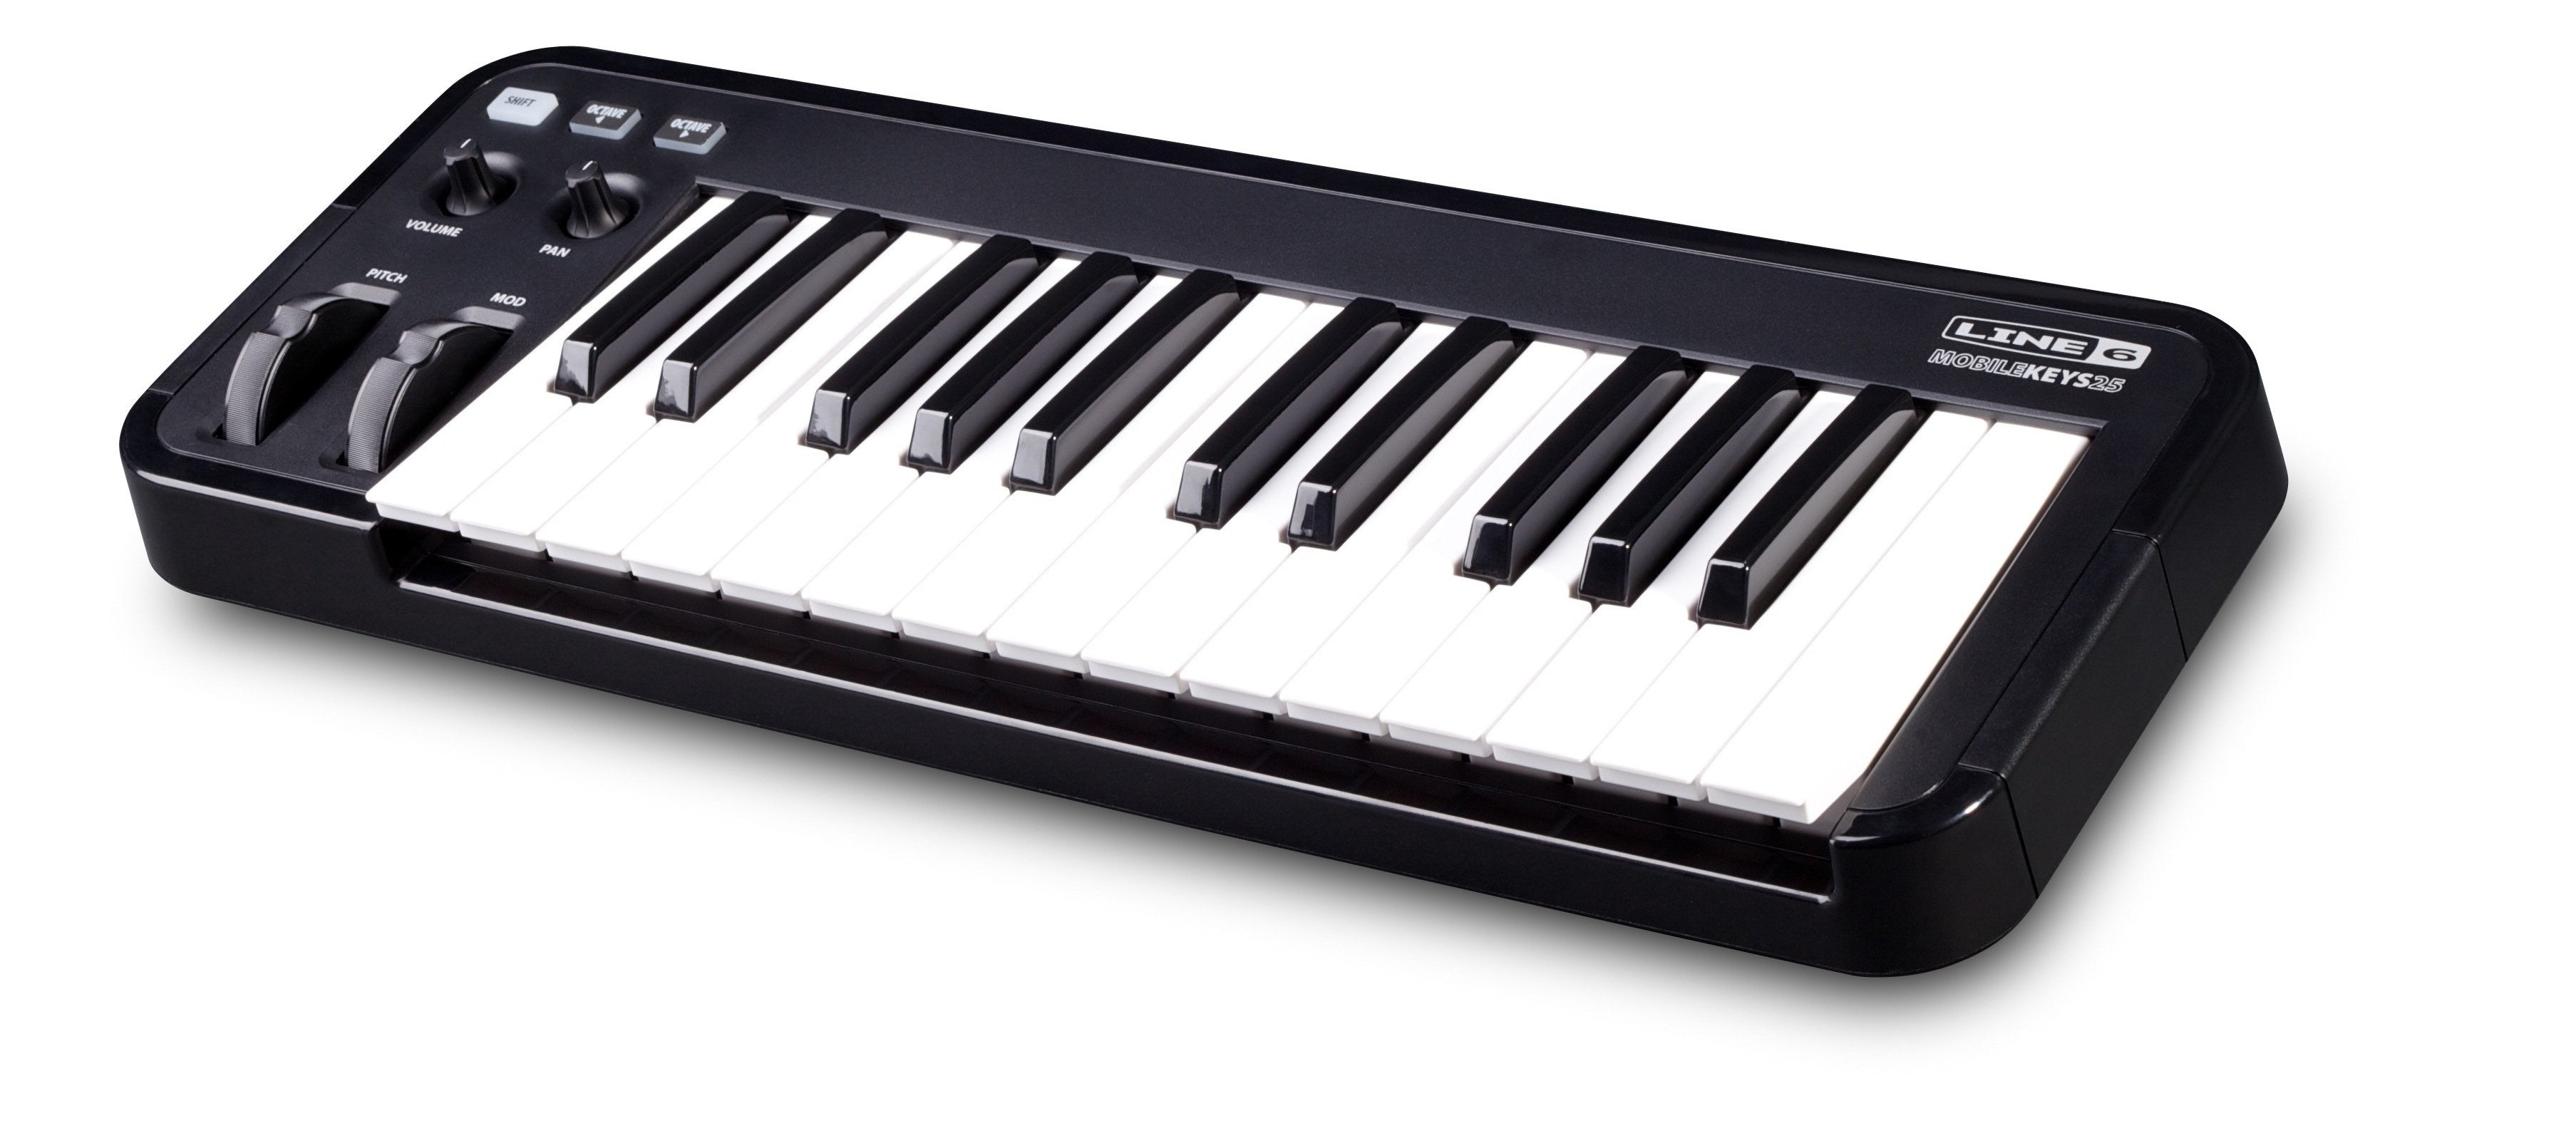 Line 6 25Key MIDI Controller Keyboard - L.A. Music - Canada's Favourite Music Store!